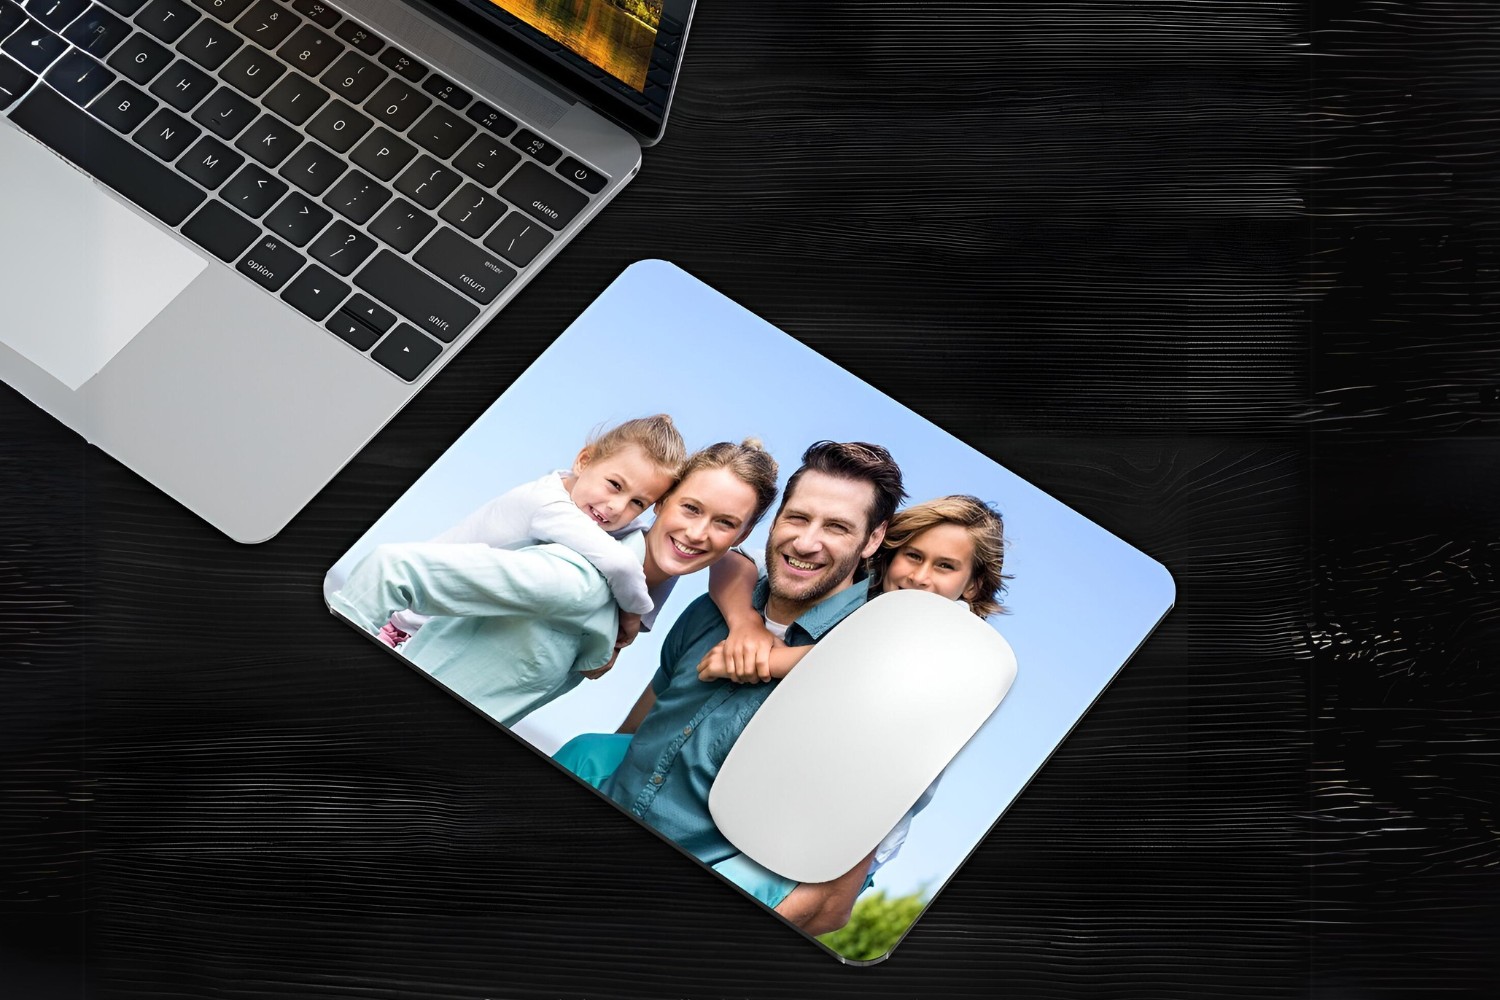 How To Put Pictures On A Mouse Pad